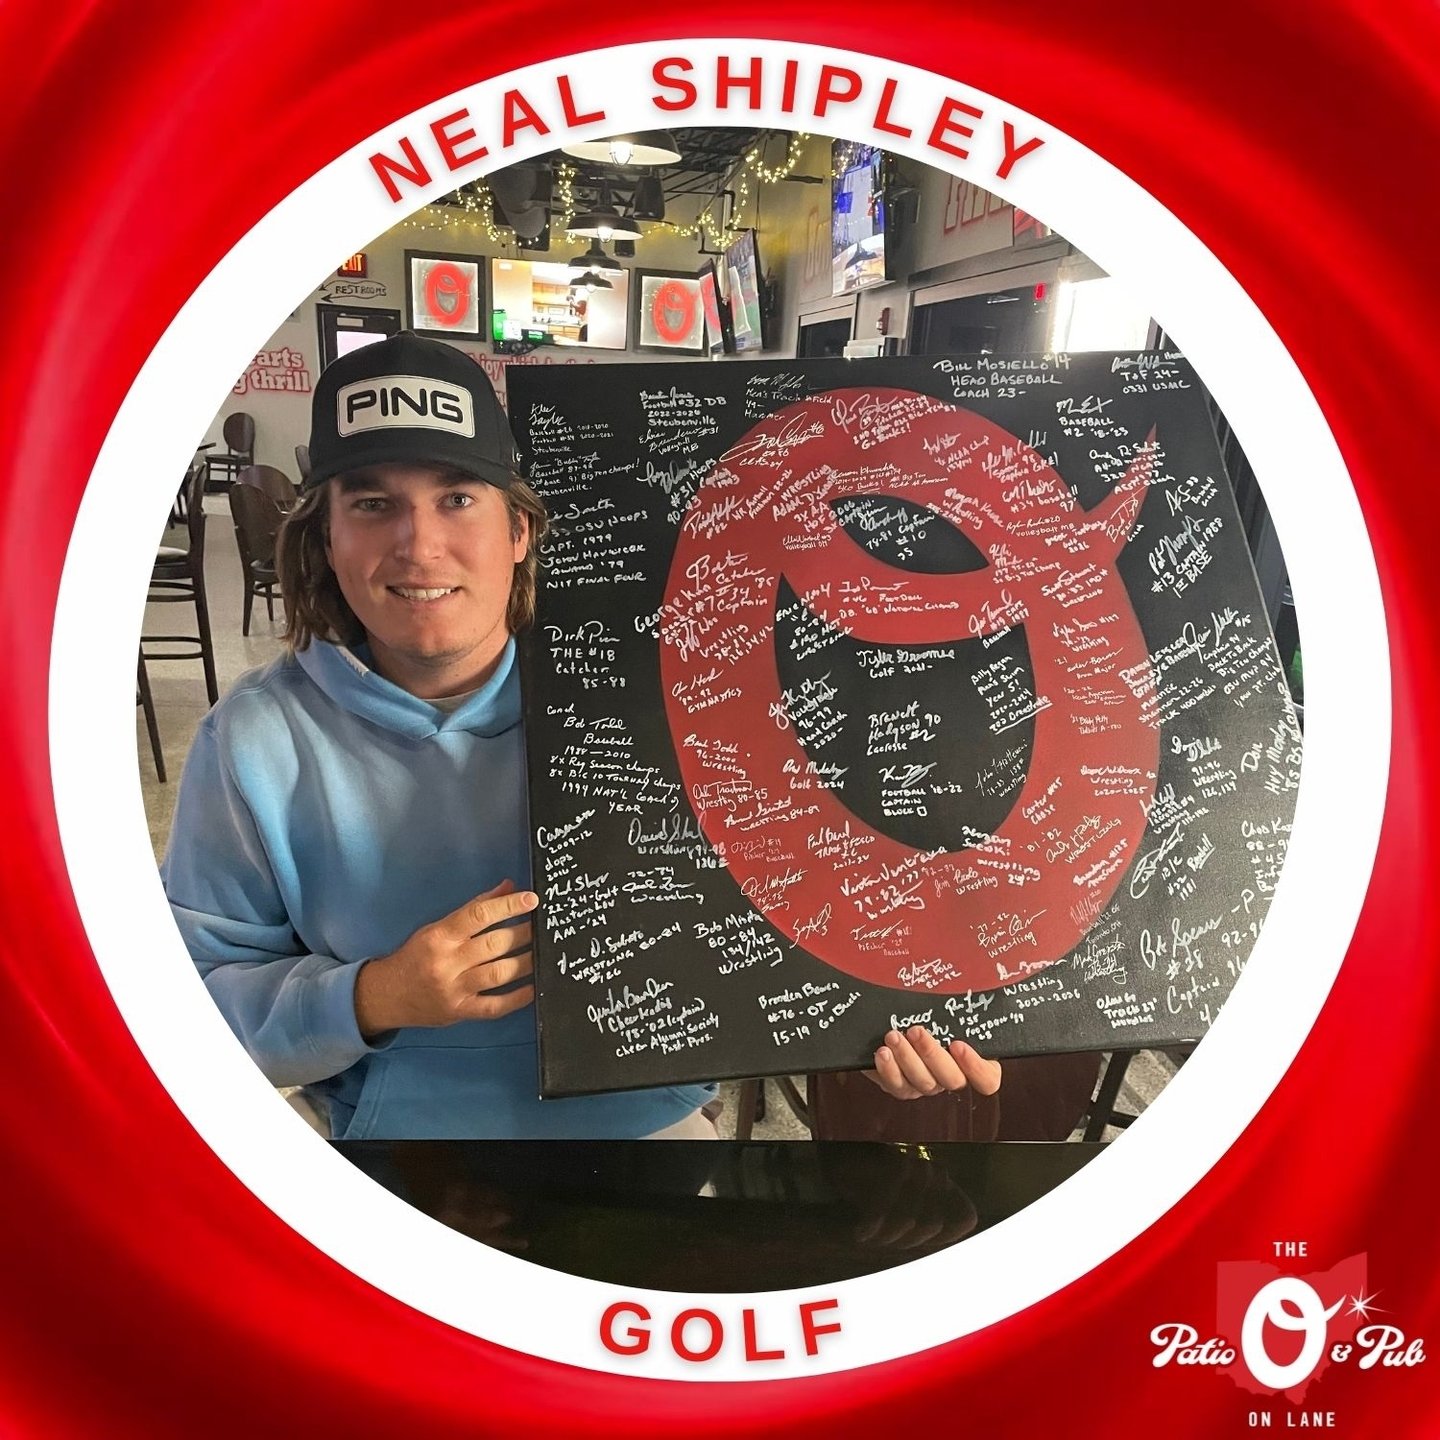 ✨Congratulations to Buckeye NEAL SHIPLEY for recently earning low amateur honors at his first Masters Tournament and a Sunday round at Augusta with Tiger Woods. ⛳ #gobucks